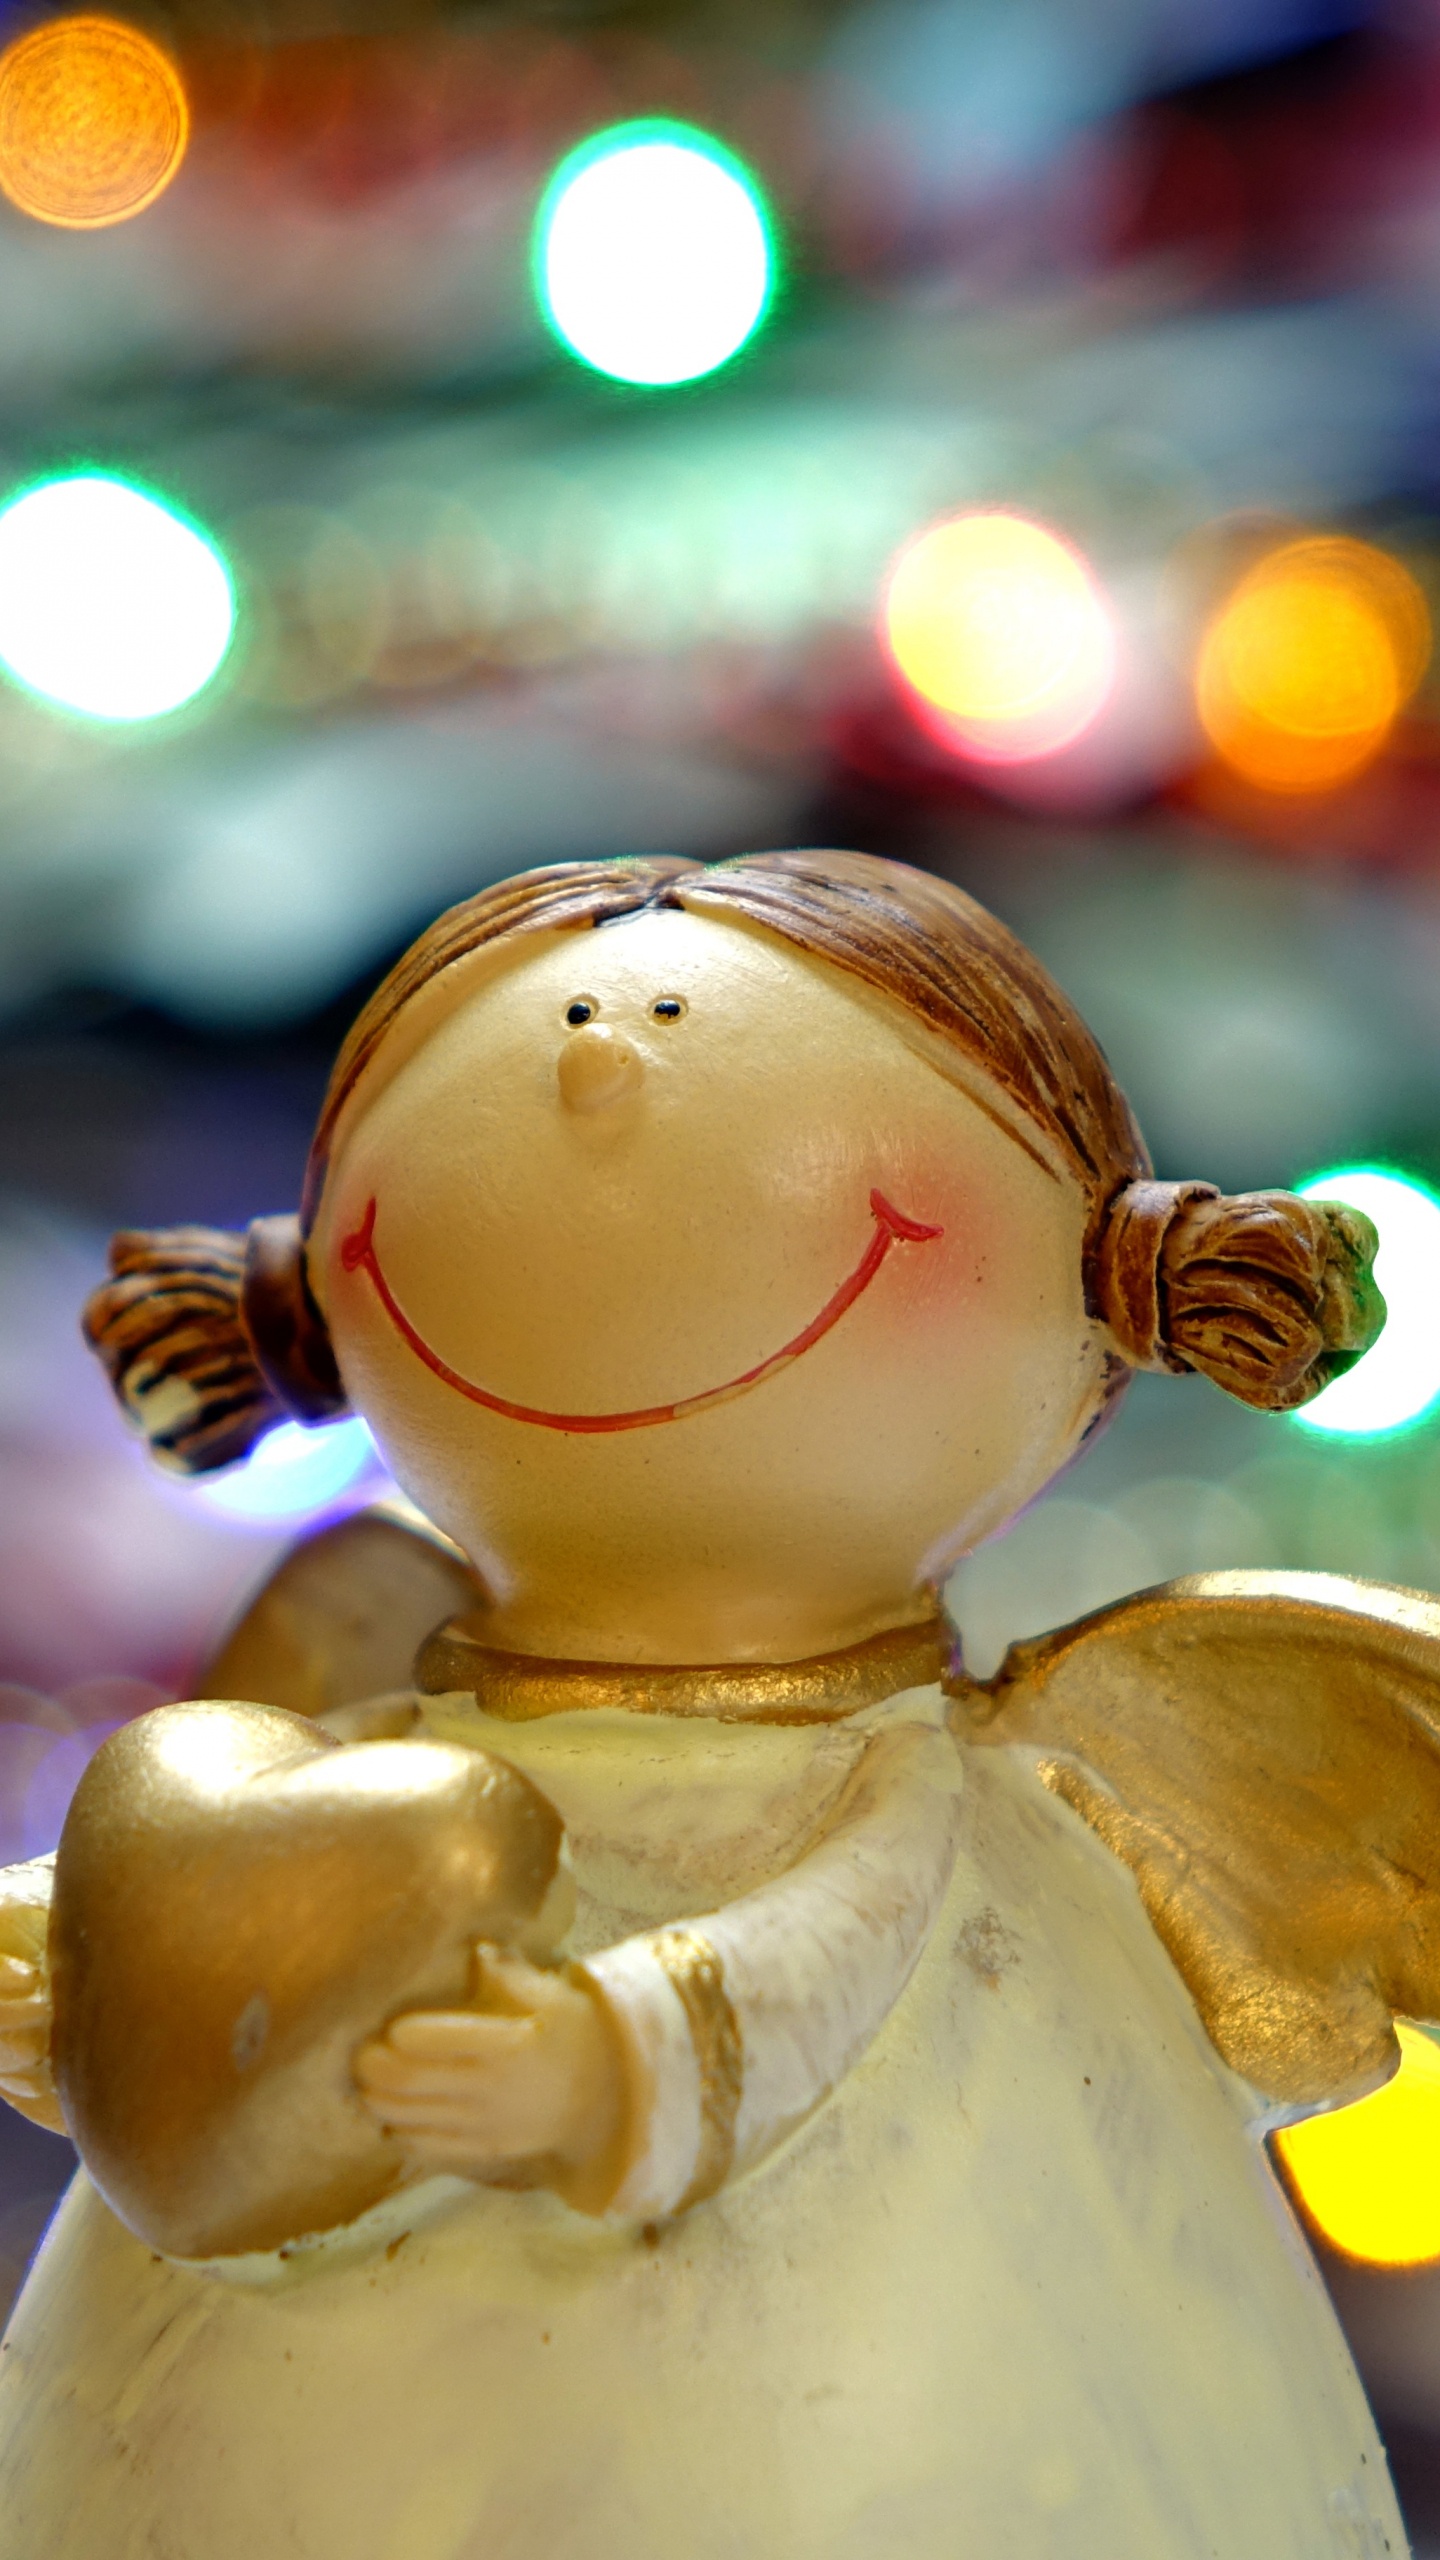 White Angel Ceramic Figurine in Bokeh Photography. Wallpaper in 1440x2560 Resolution